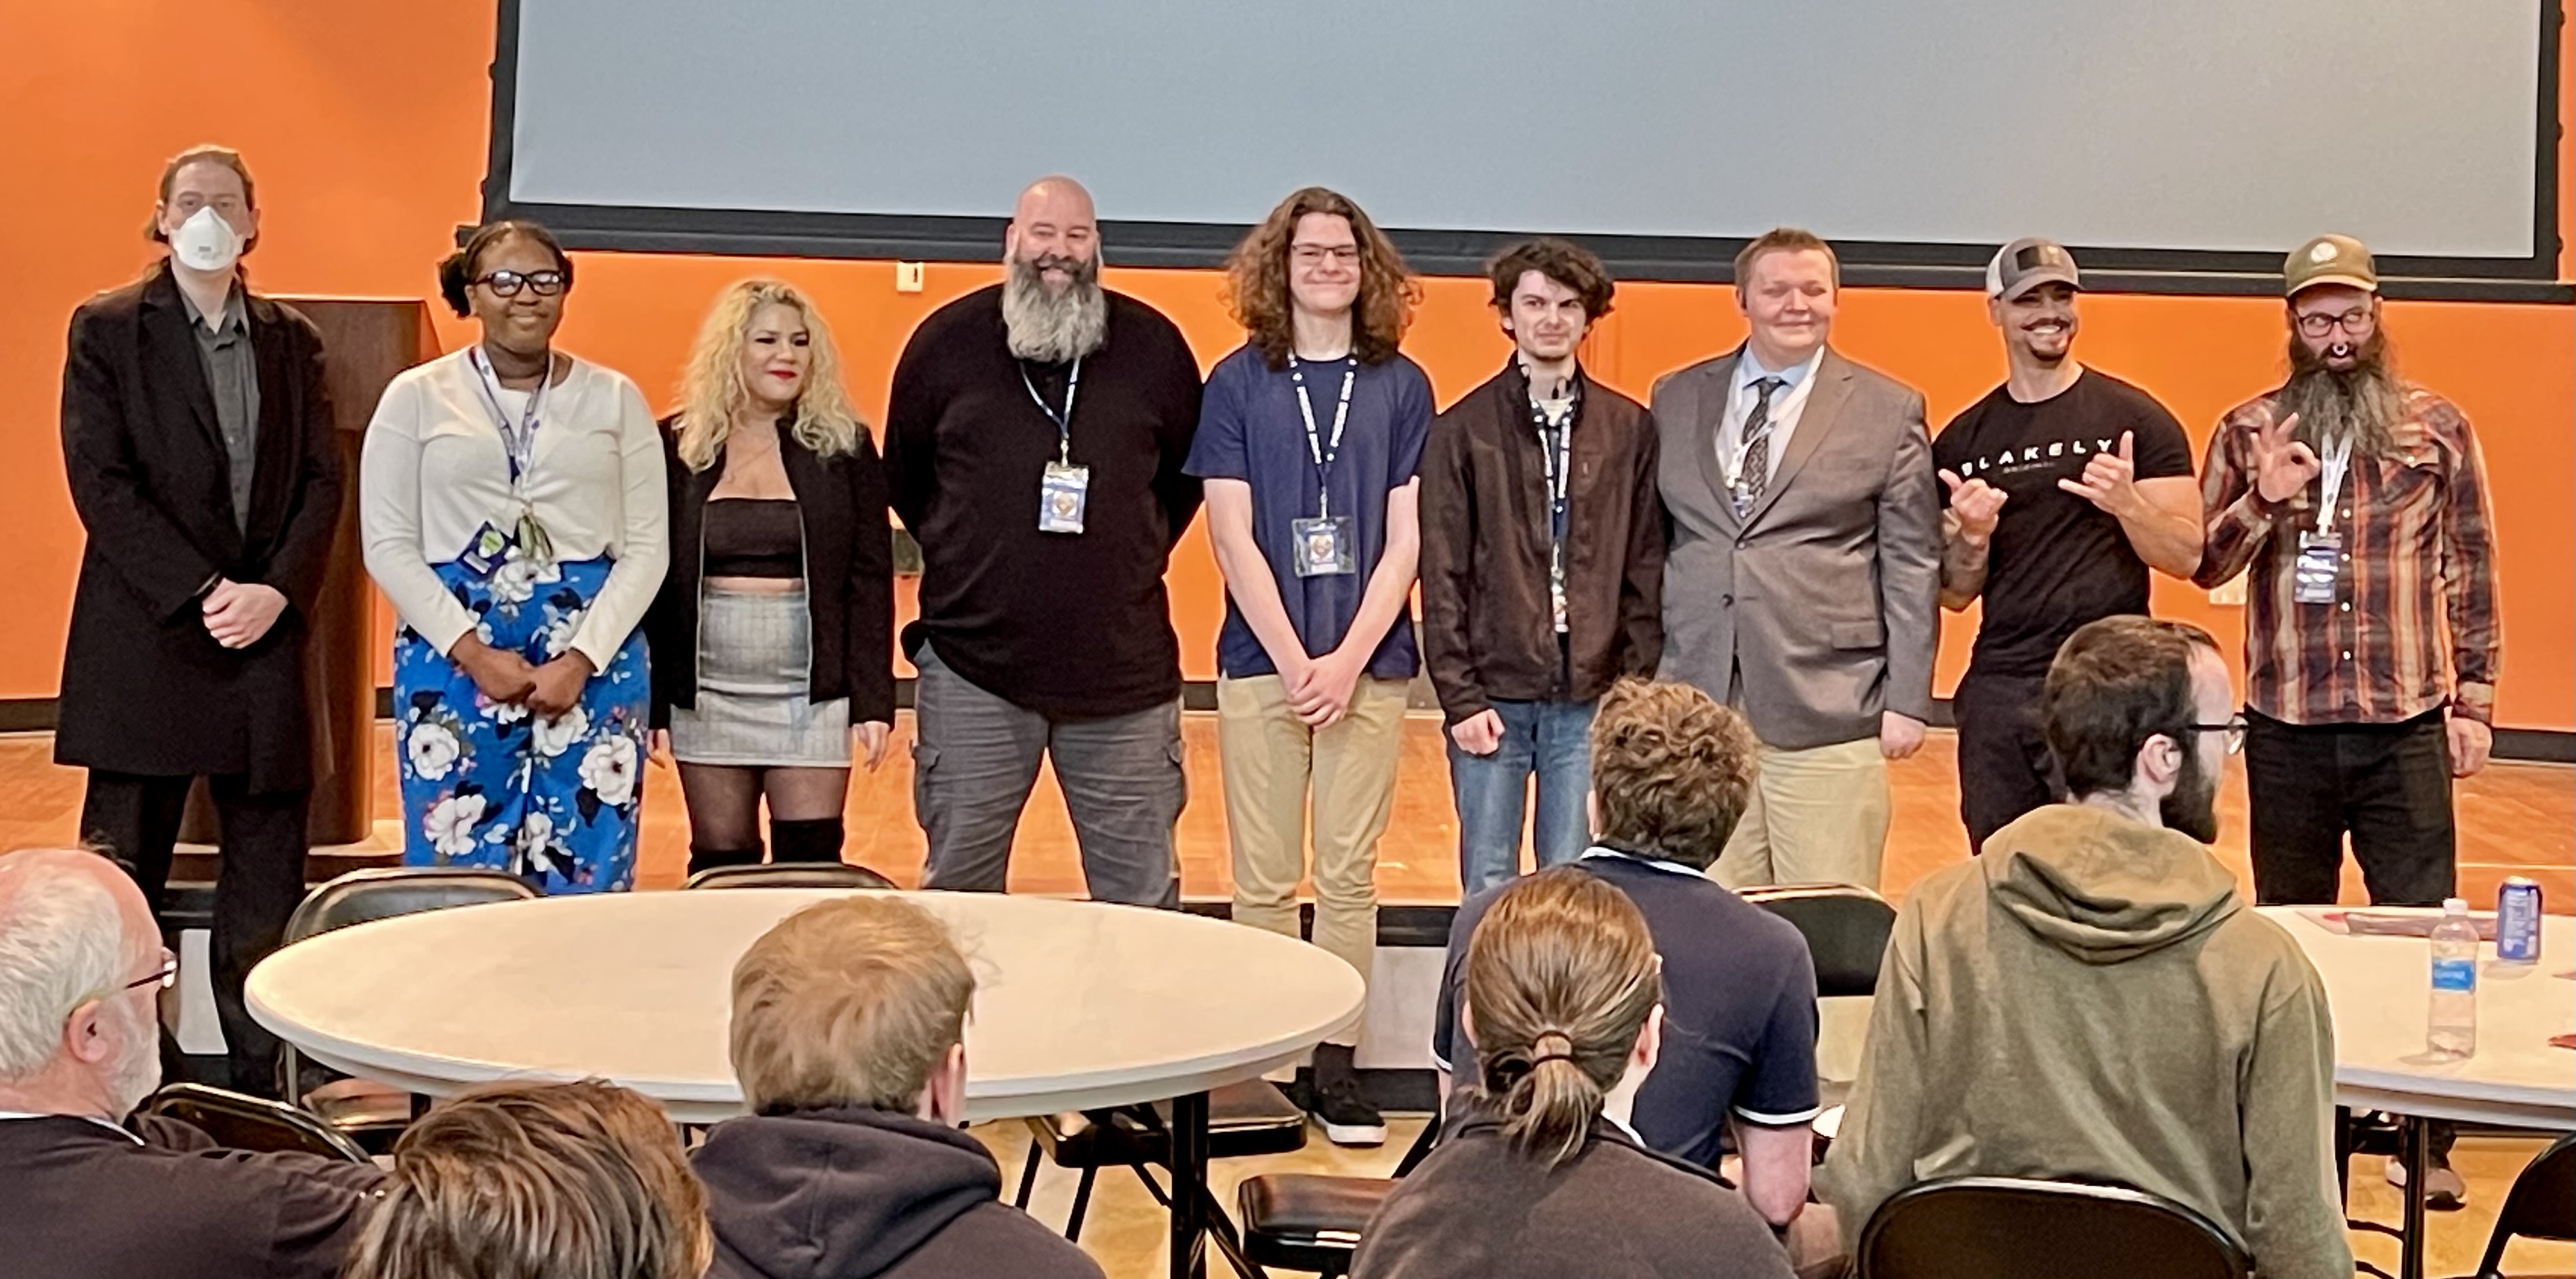 SPSCC's cybersecurity club, the Mad Hatters, being honored at the CCDC Pacific Rim Regional Competition awards ceremony